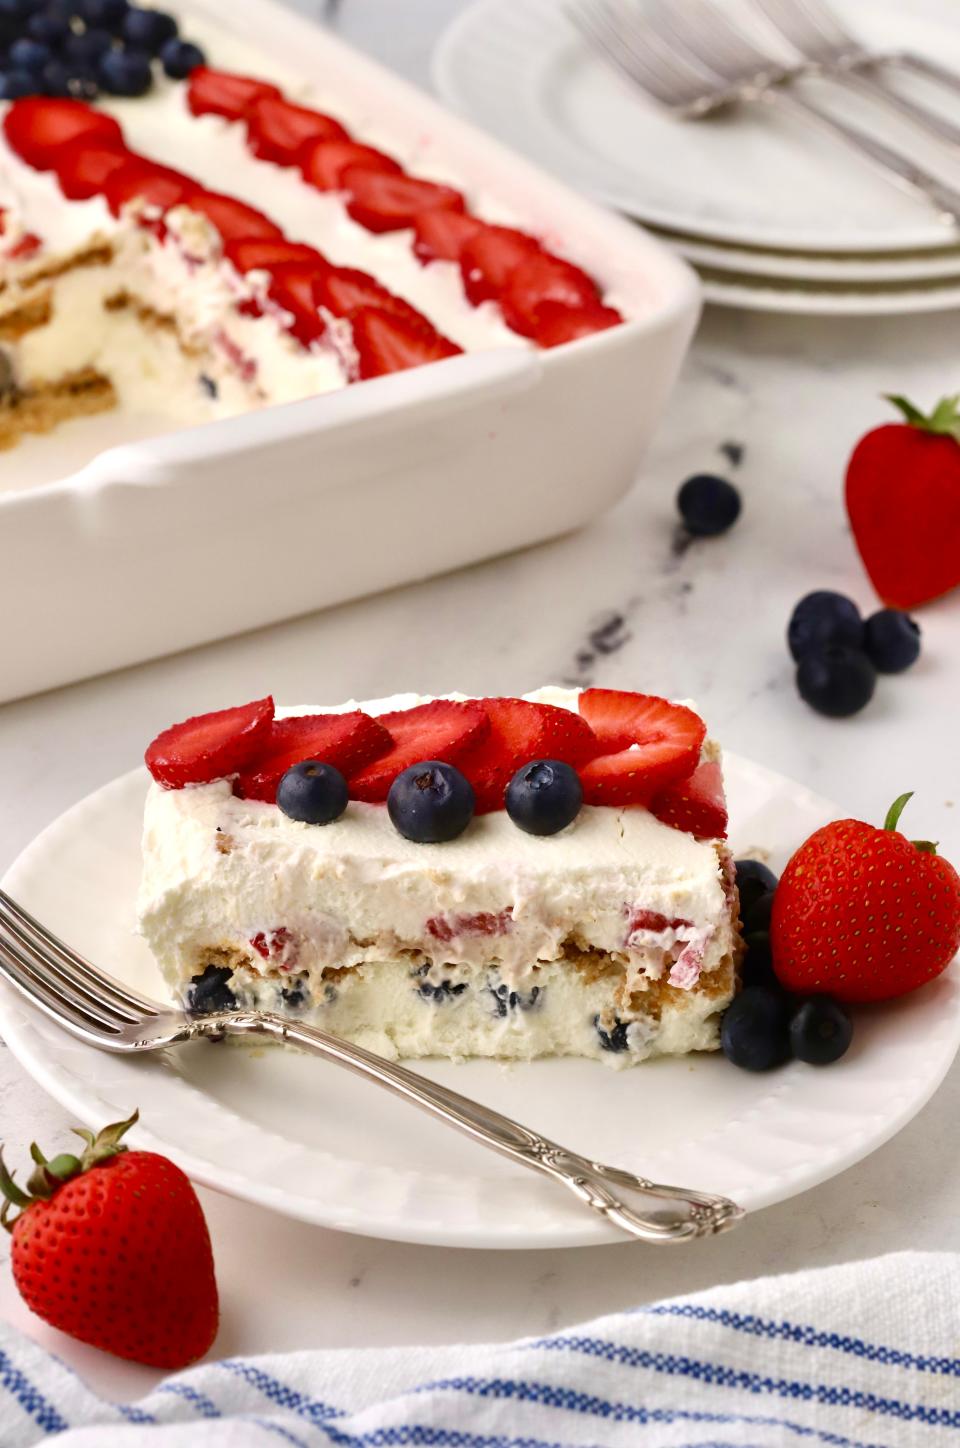 No-bake cake with whipped cream, graham crackers,  strawberries and blueberries is perfect for July Fourth.